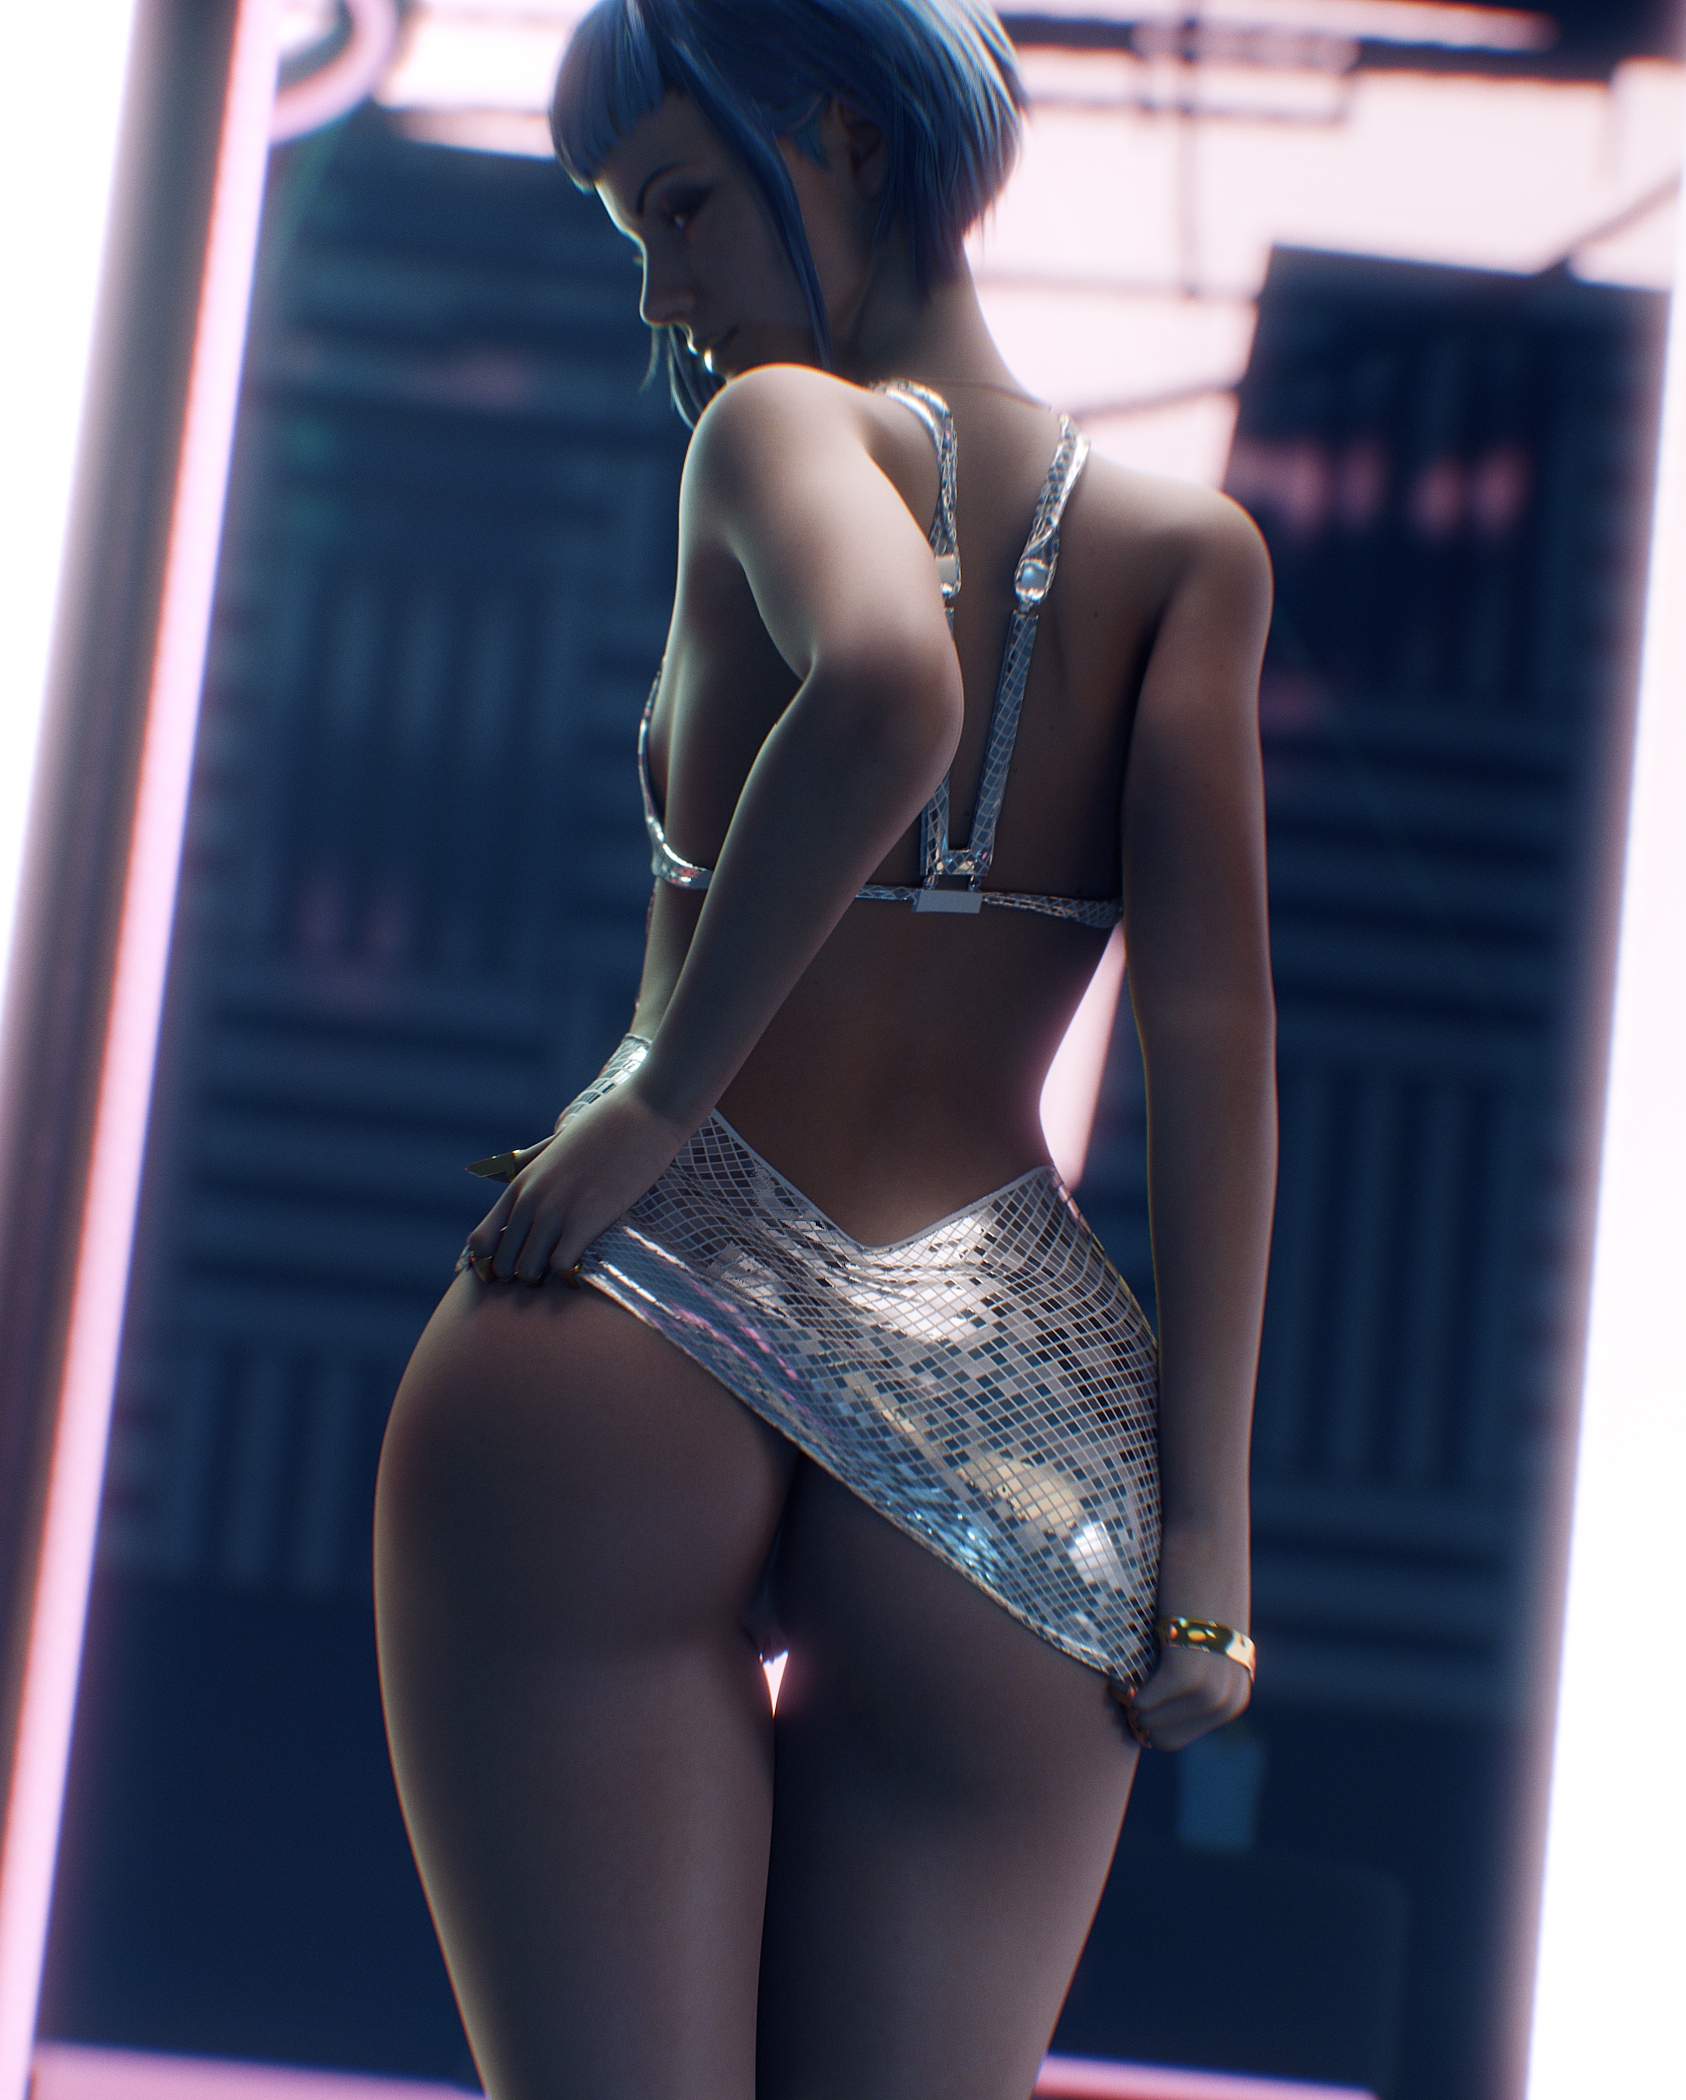 evelyn parker sexy back pose Evelyn Parker Cyberpunk2077 Ass Back View Sexy Half Naked 3d Porn